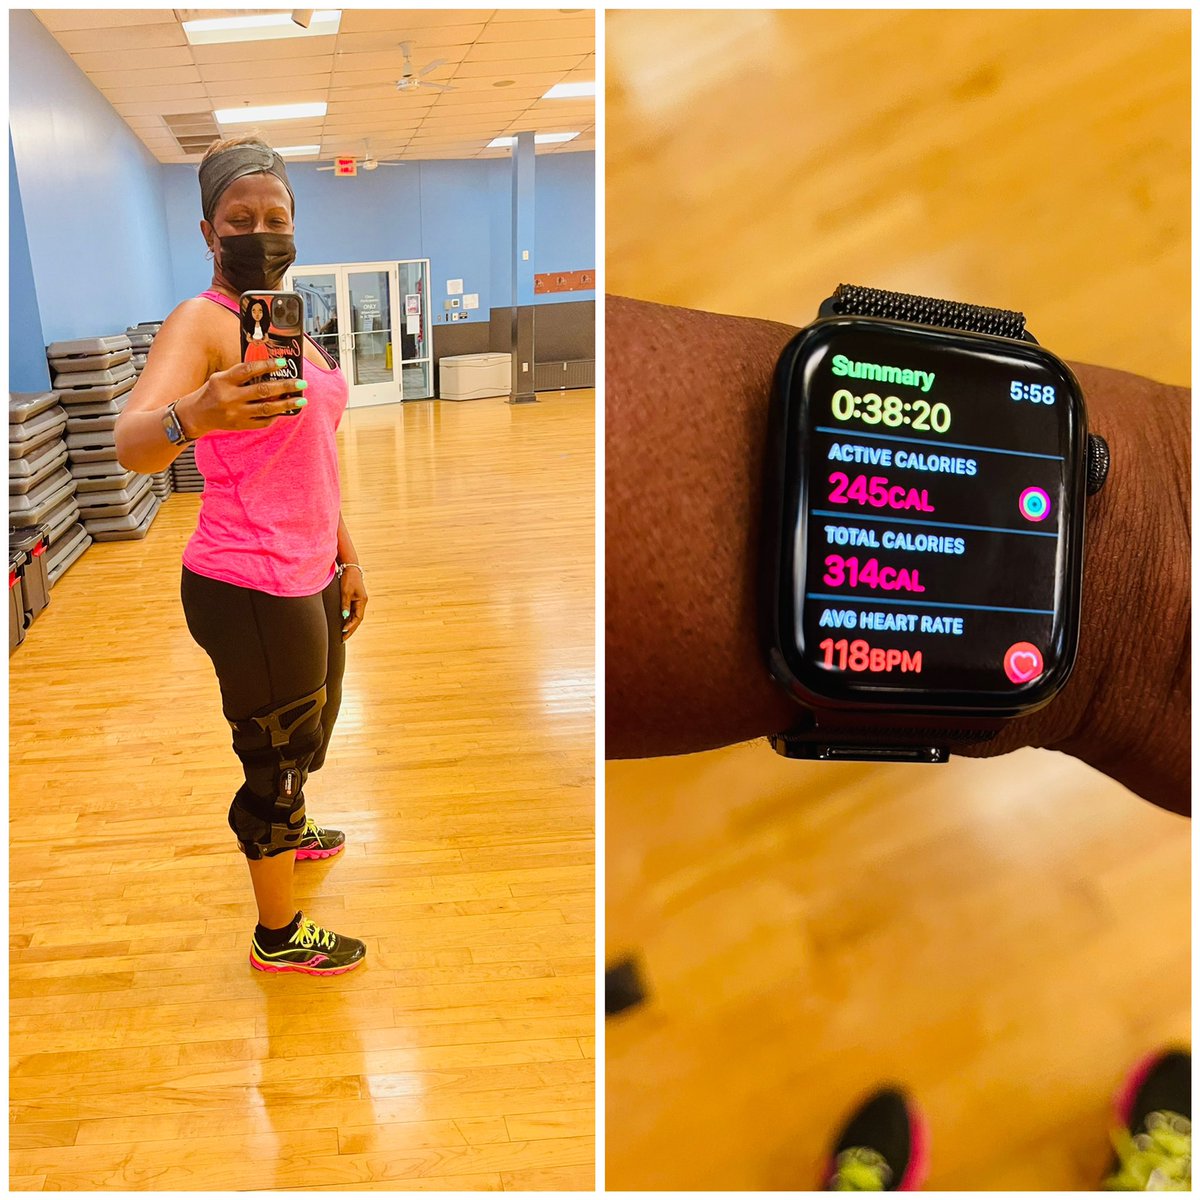 Groove class complete.✅ #MondayFitness #Grooving #FitLeaders #LetsGo💃🏽💃🏽💃🏽